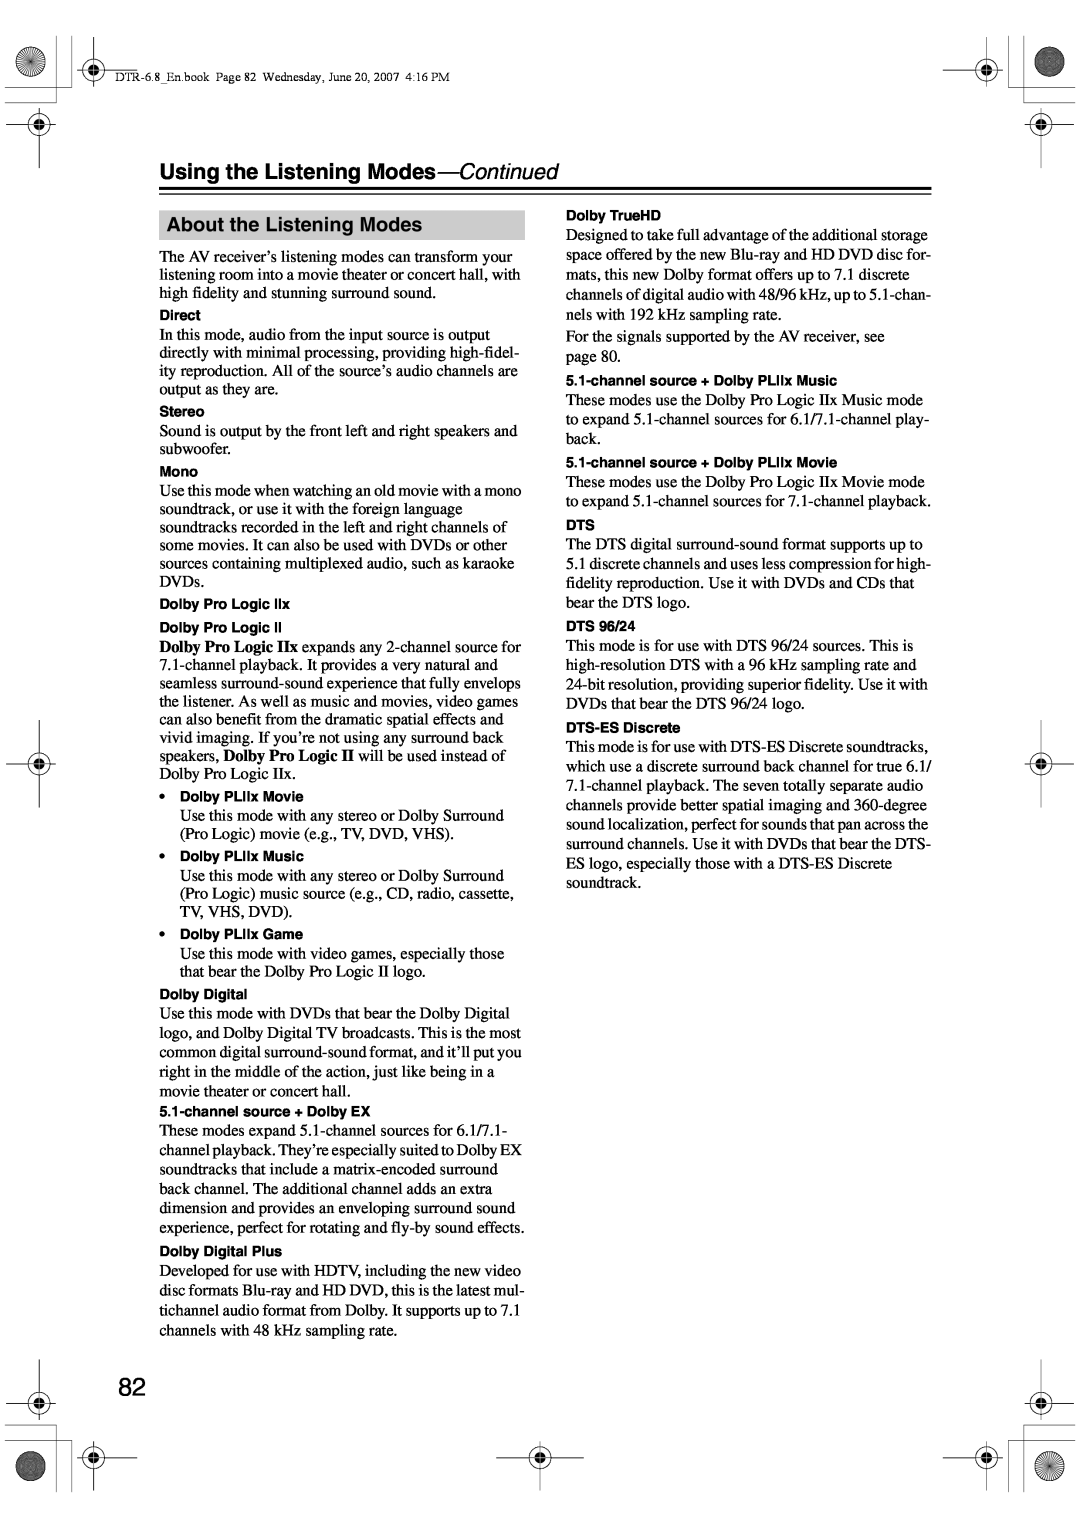 Integra DTR-6.8 instruction manual About the Listening Modes, Using the Listening Modes—Continued 